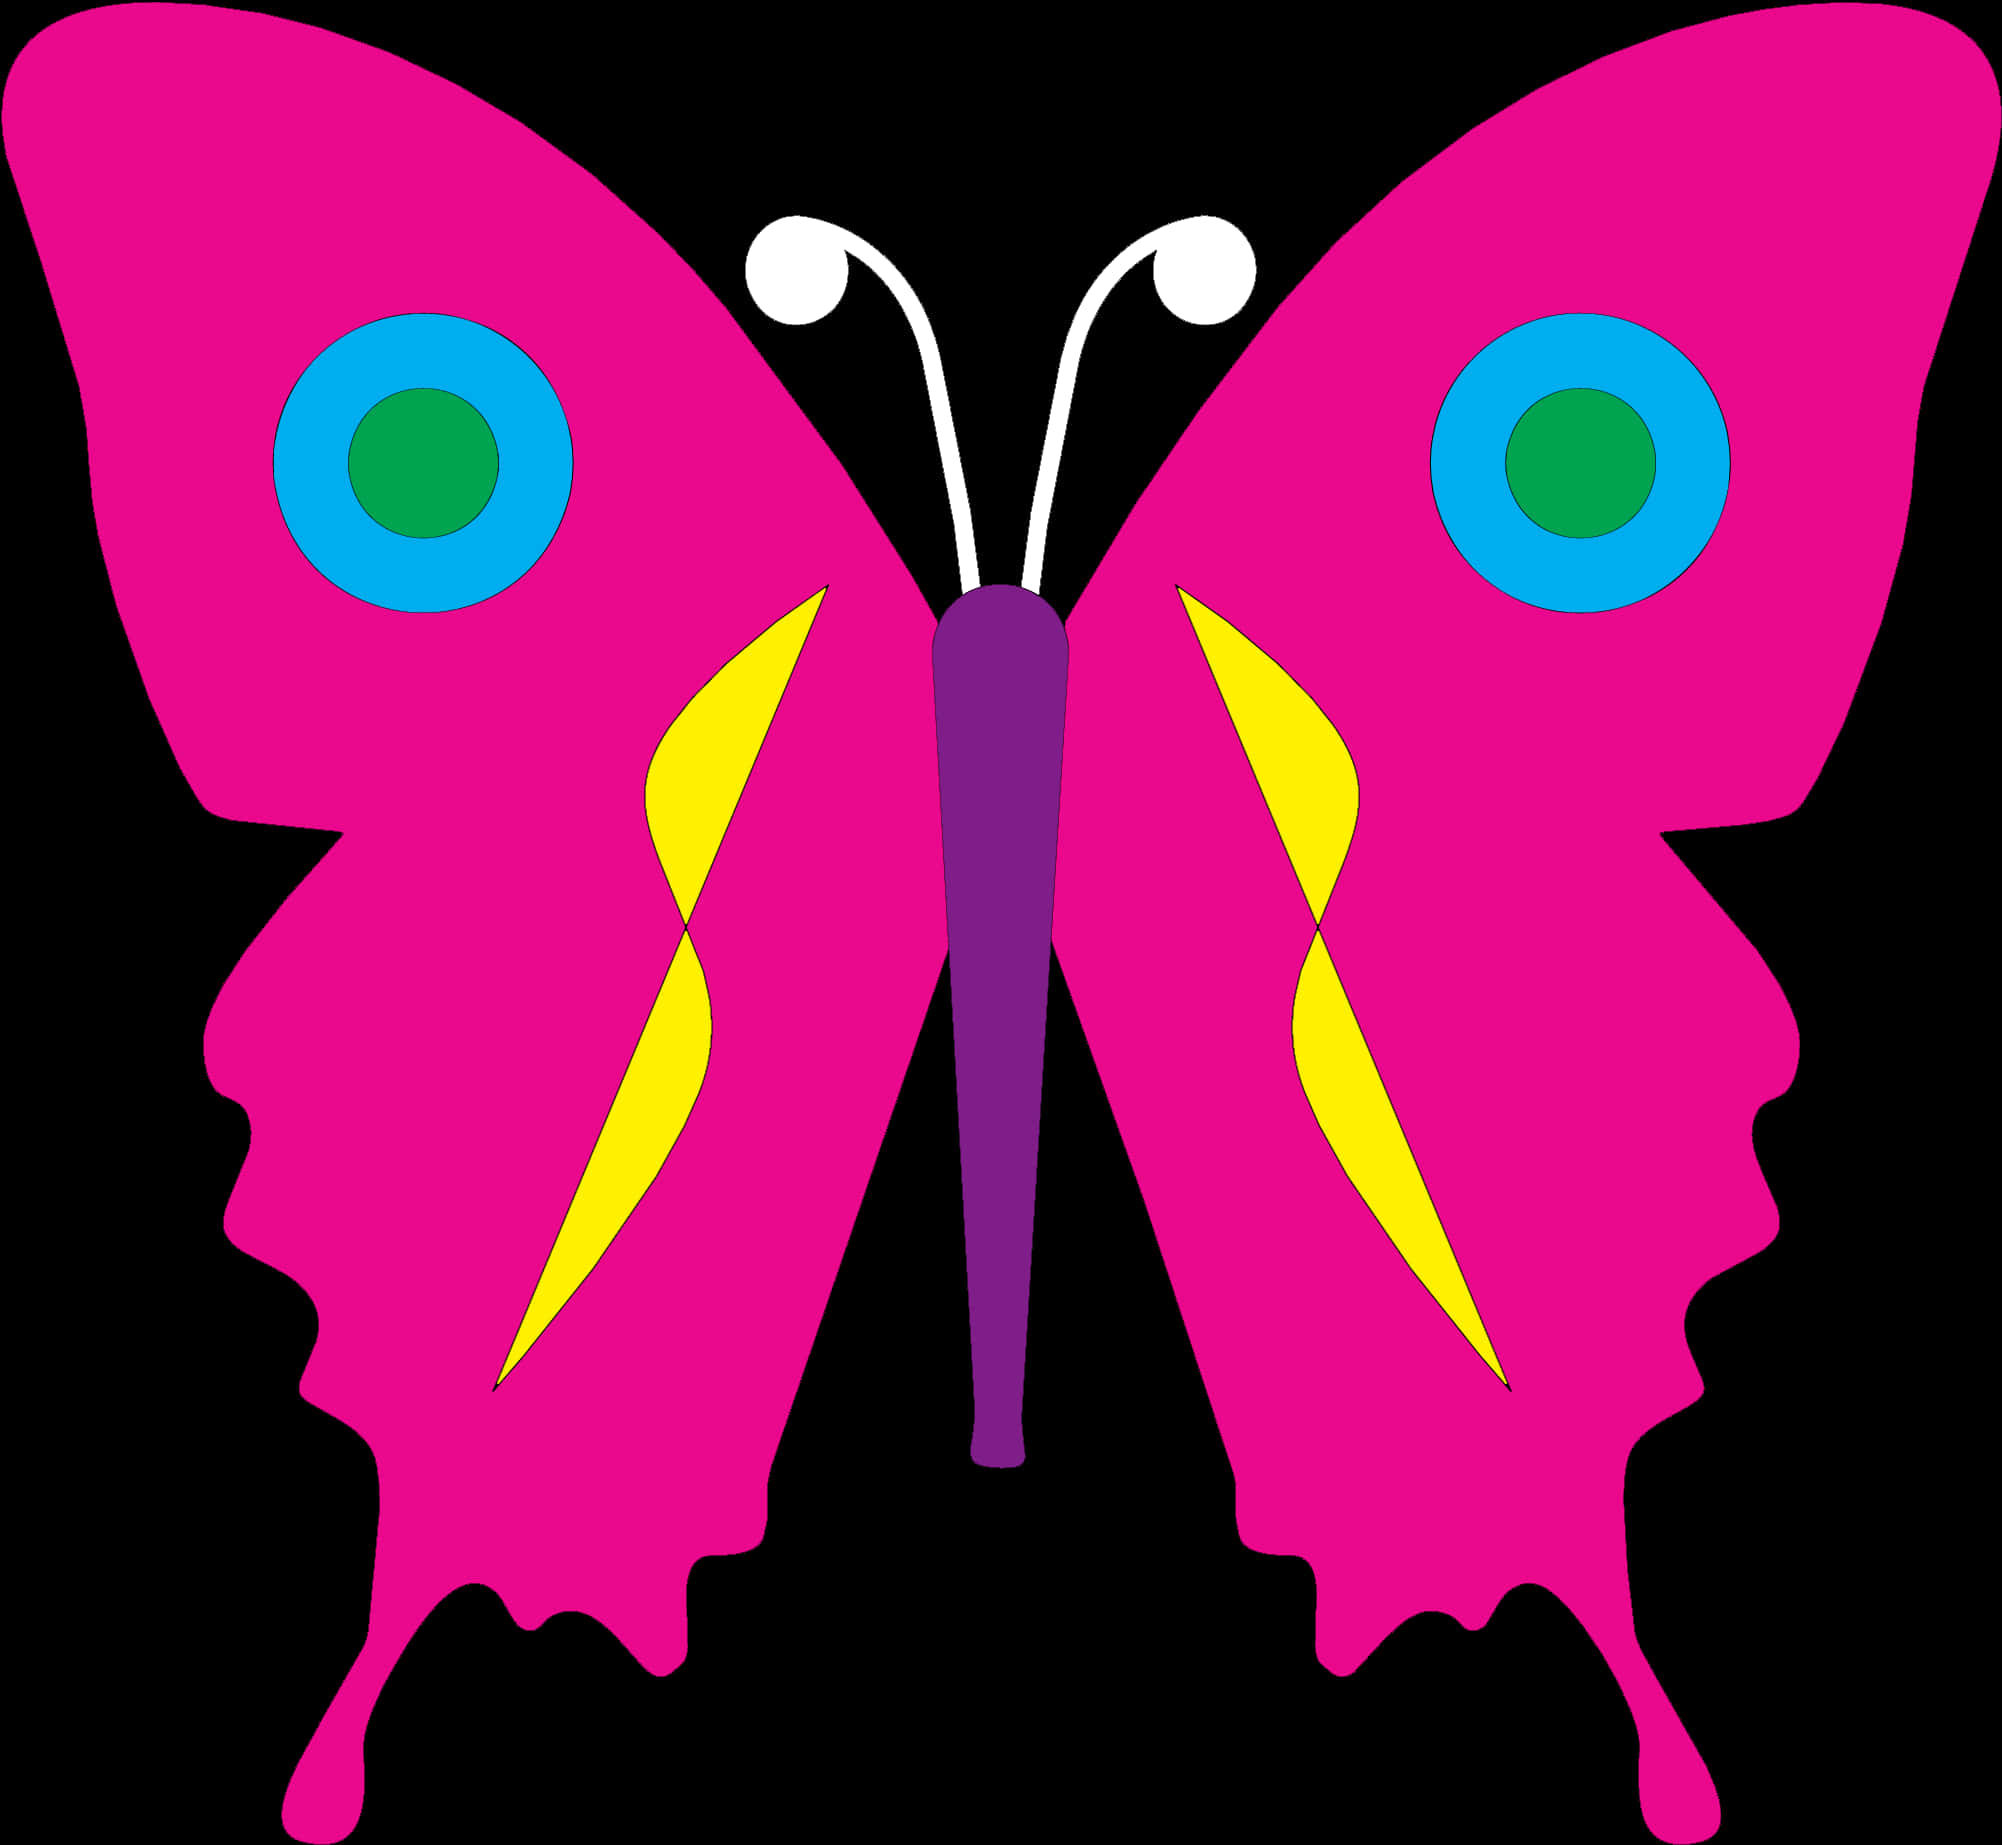 Vibrant Pink Butterfly Graphic PNG